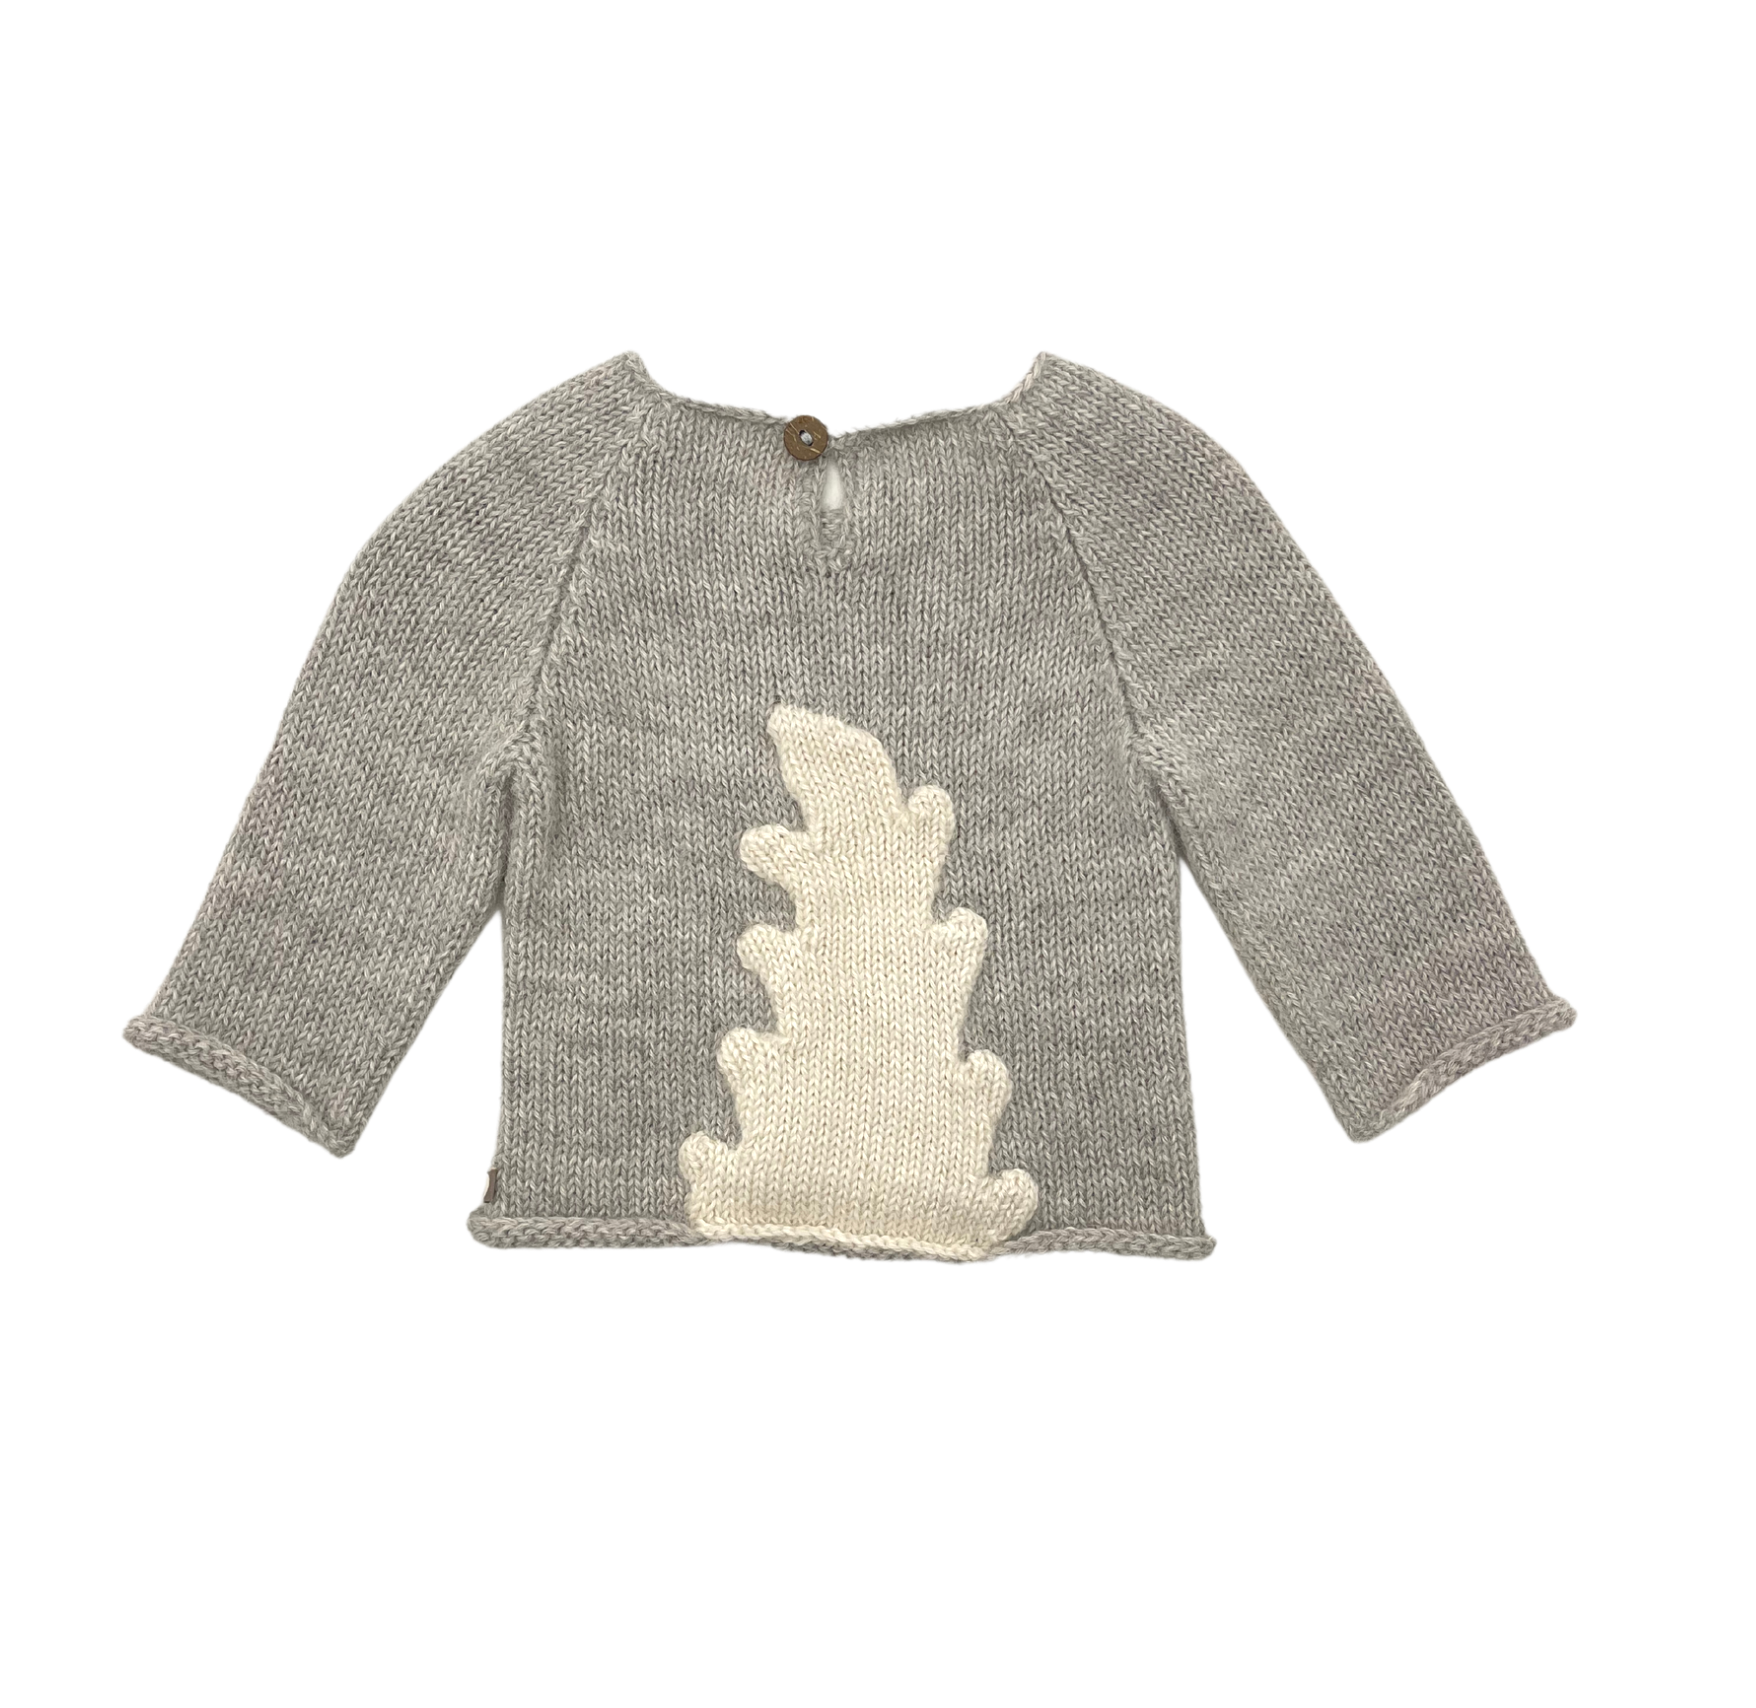 OEUF NYC - Gray sweater - 6 months